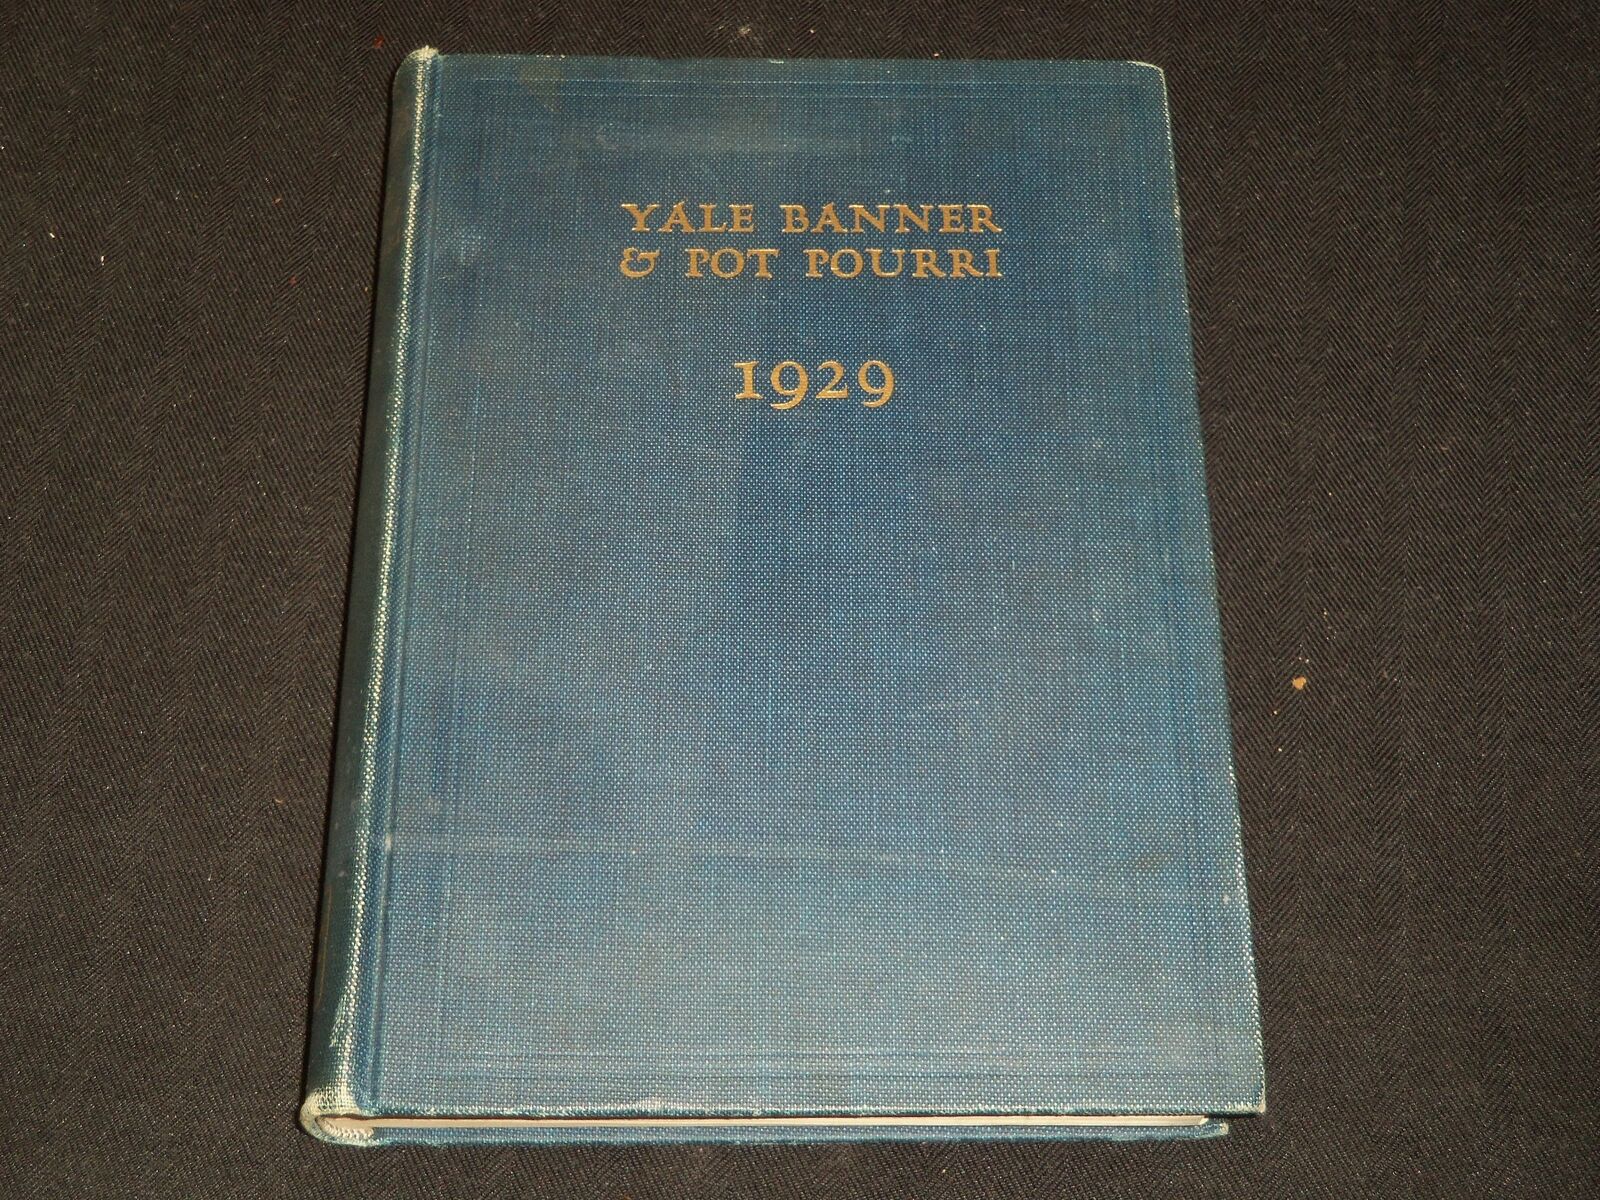 1930 THE YALE BANNER & POT POURRI YALE UNIVERSITY YEARBOOK - NEW HAVEN - YB 1874